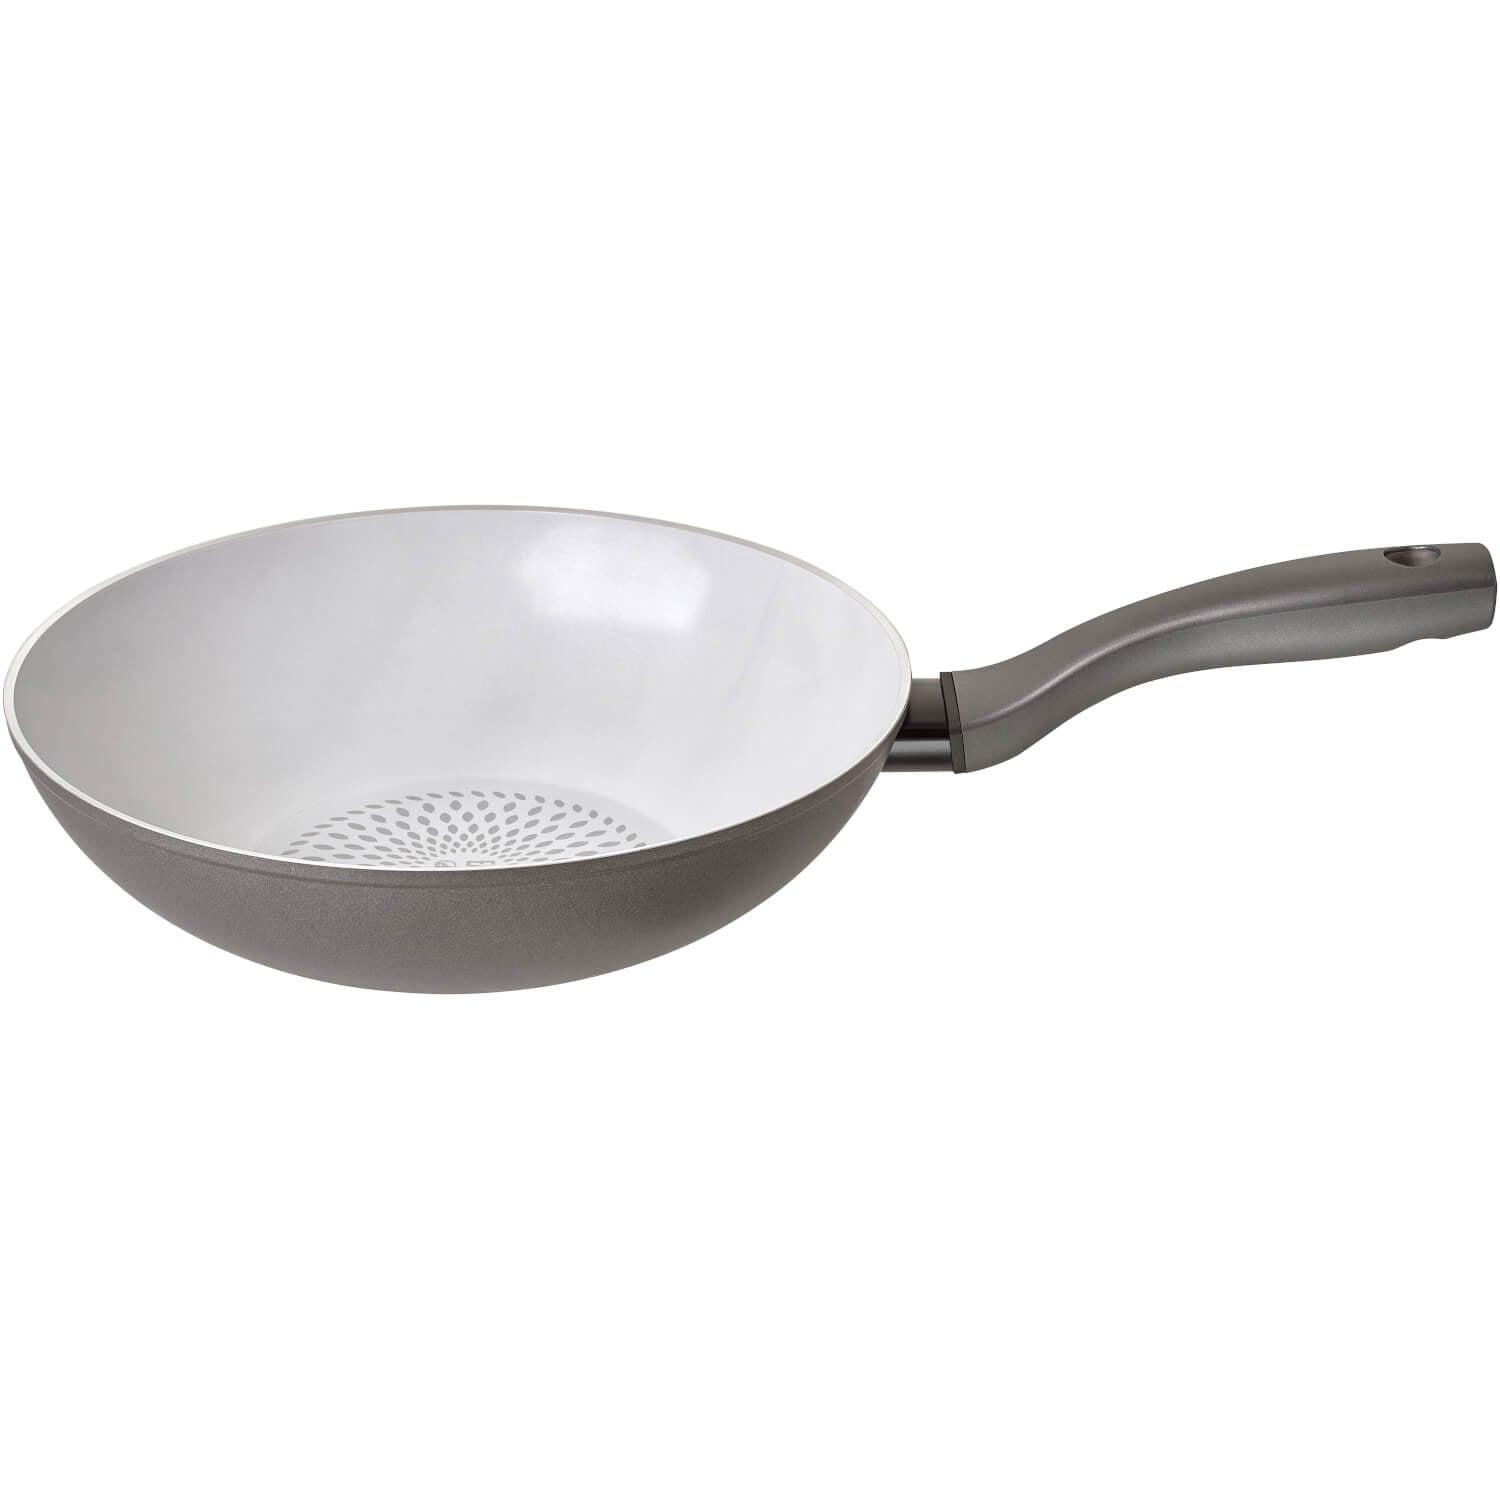 Meyers Earth Pan Stirfry - 28cm 1 Shaws Department Stores